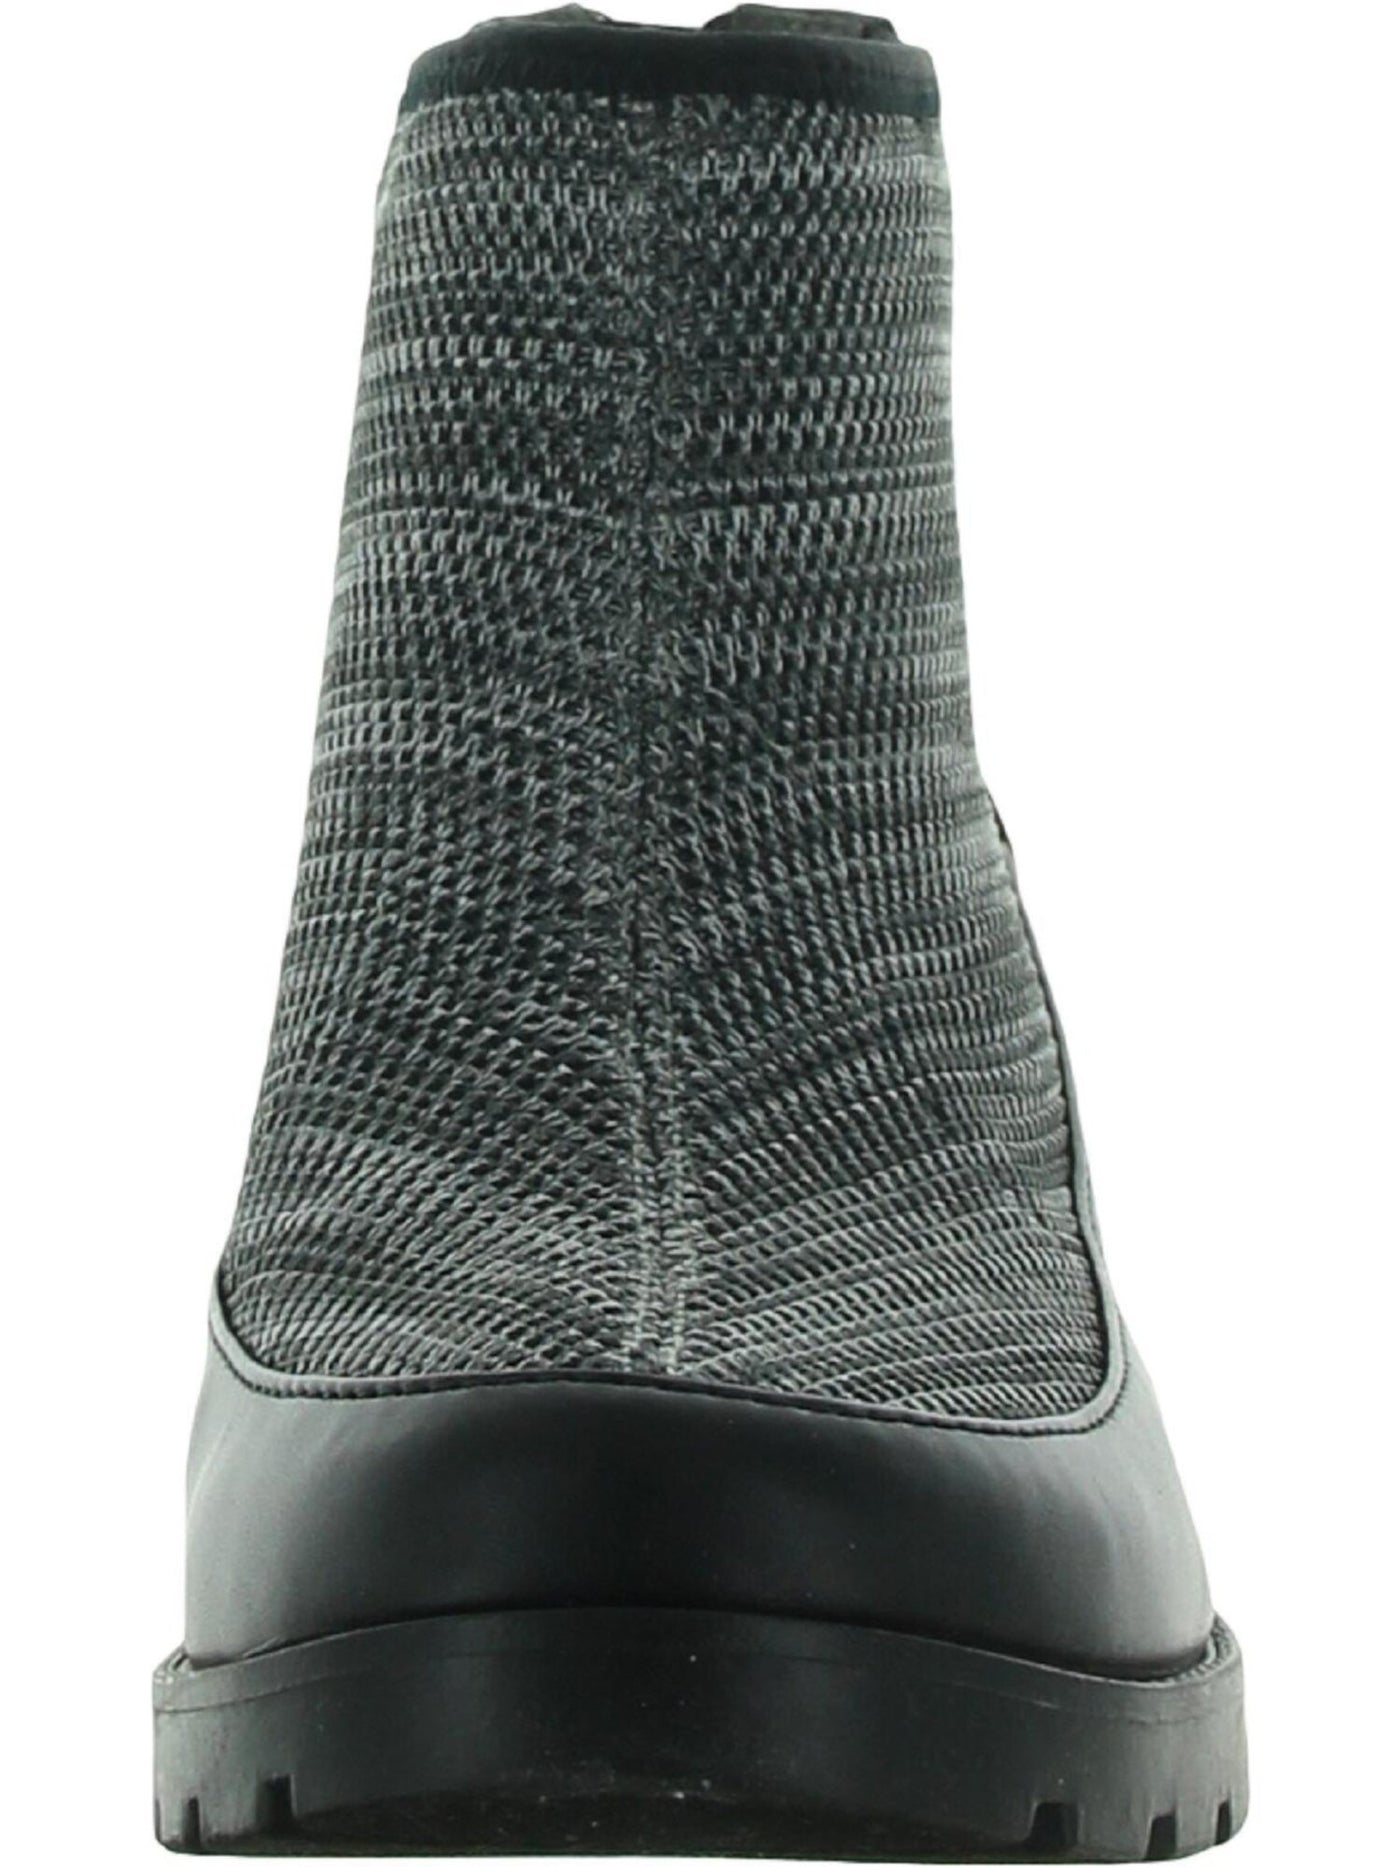 ADRIENNE VITTADINI SPORT Womens Gray 1/2" Platform Stretch Knit Lug Sole Cushioned Trooper Round Toe Wedge Zip-Up Booties 9.5 M